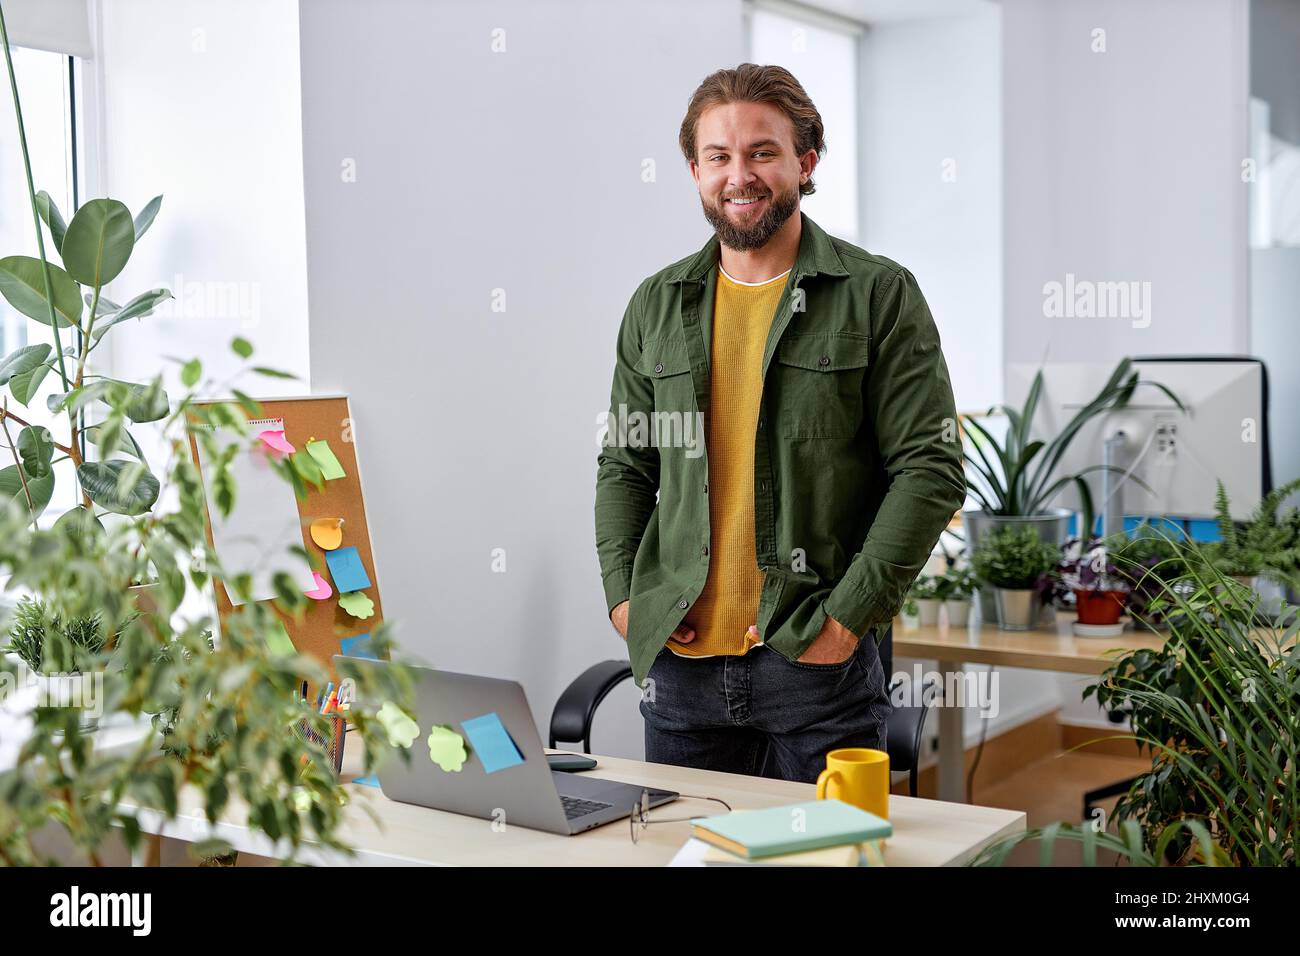 Portrait of smiling caucasian manager designer man in office posing at camera, standing behind desk with laptop, many plants in office room. European Stock Photo